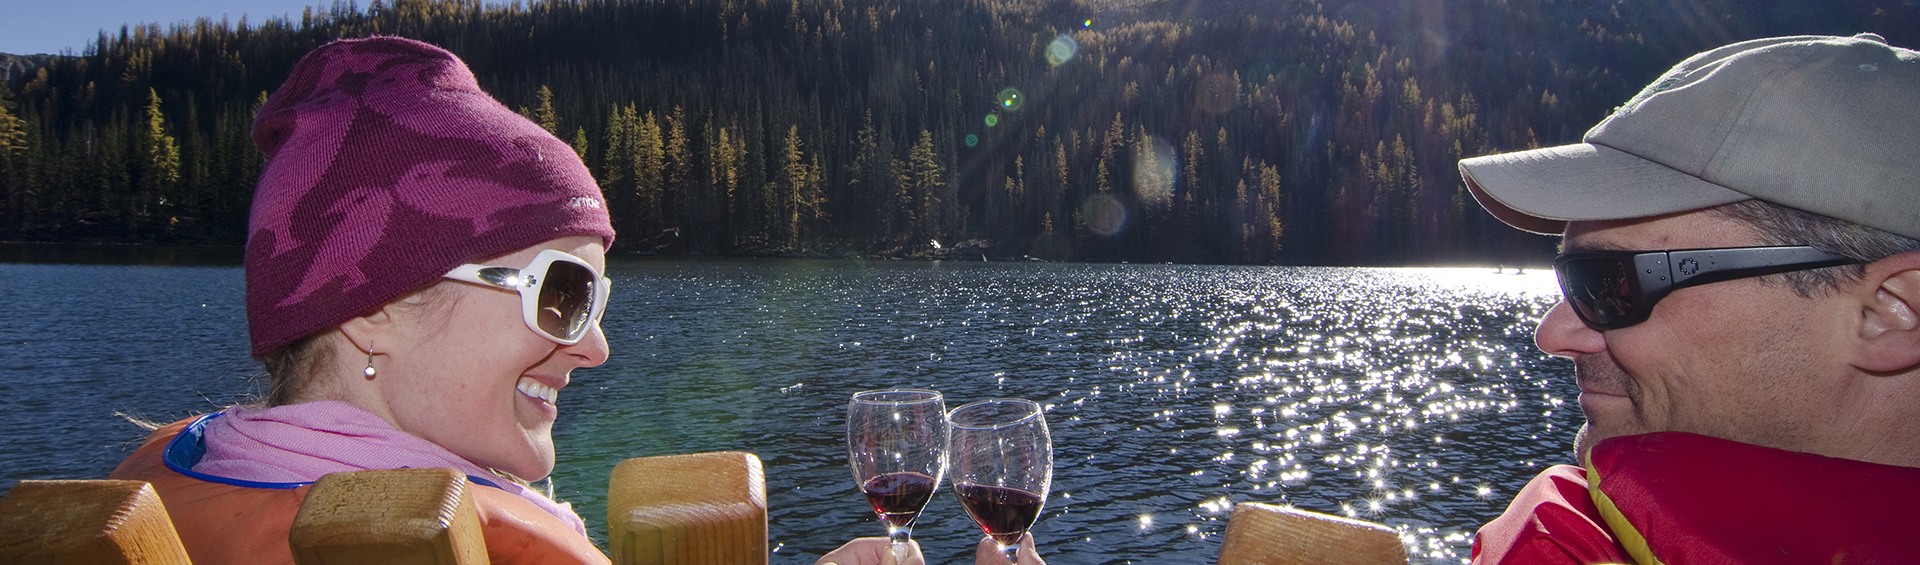 Glass of wine by the lake